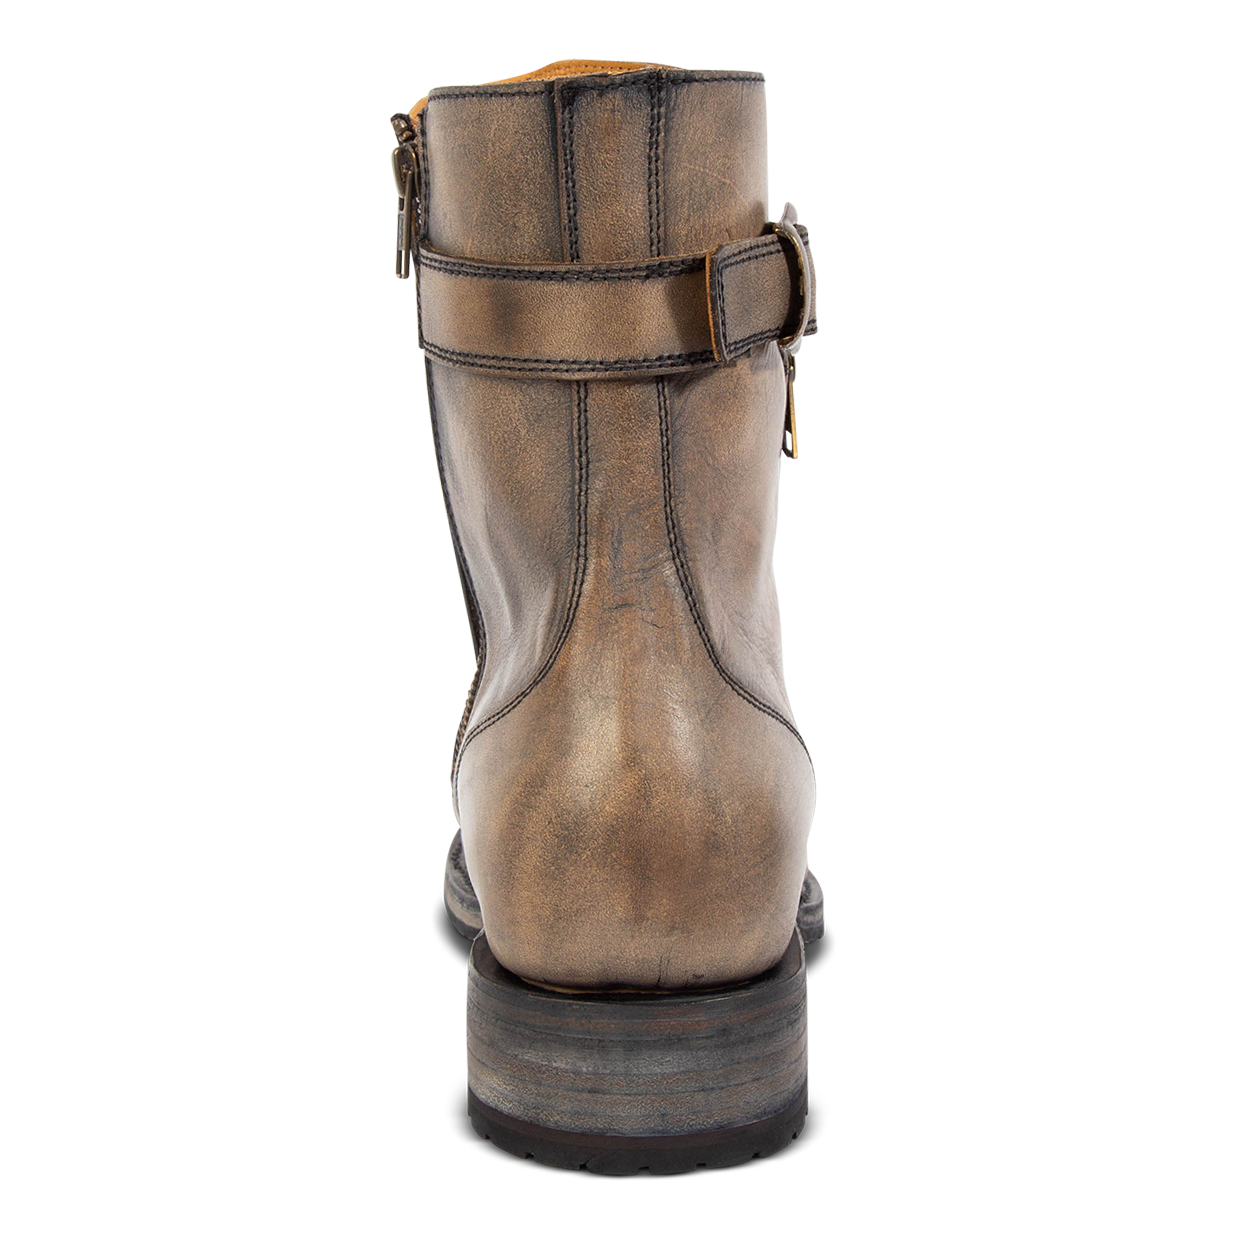 Back view showing adjustable rear buckle and low block heel on FREEBIRD men's Chayse black leather boot